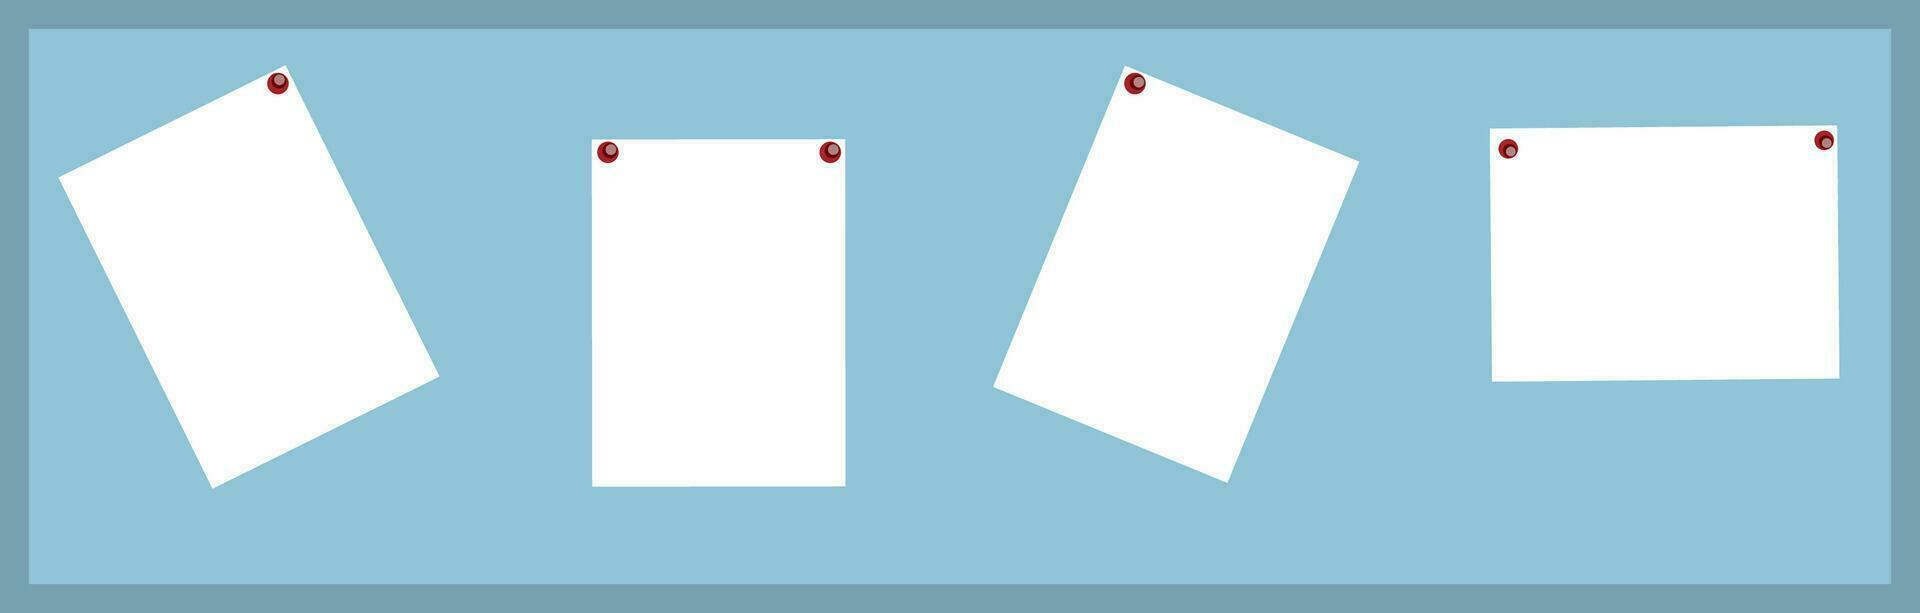 Note papers on sky blue board. vector